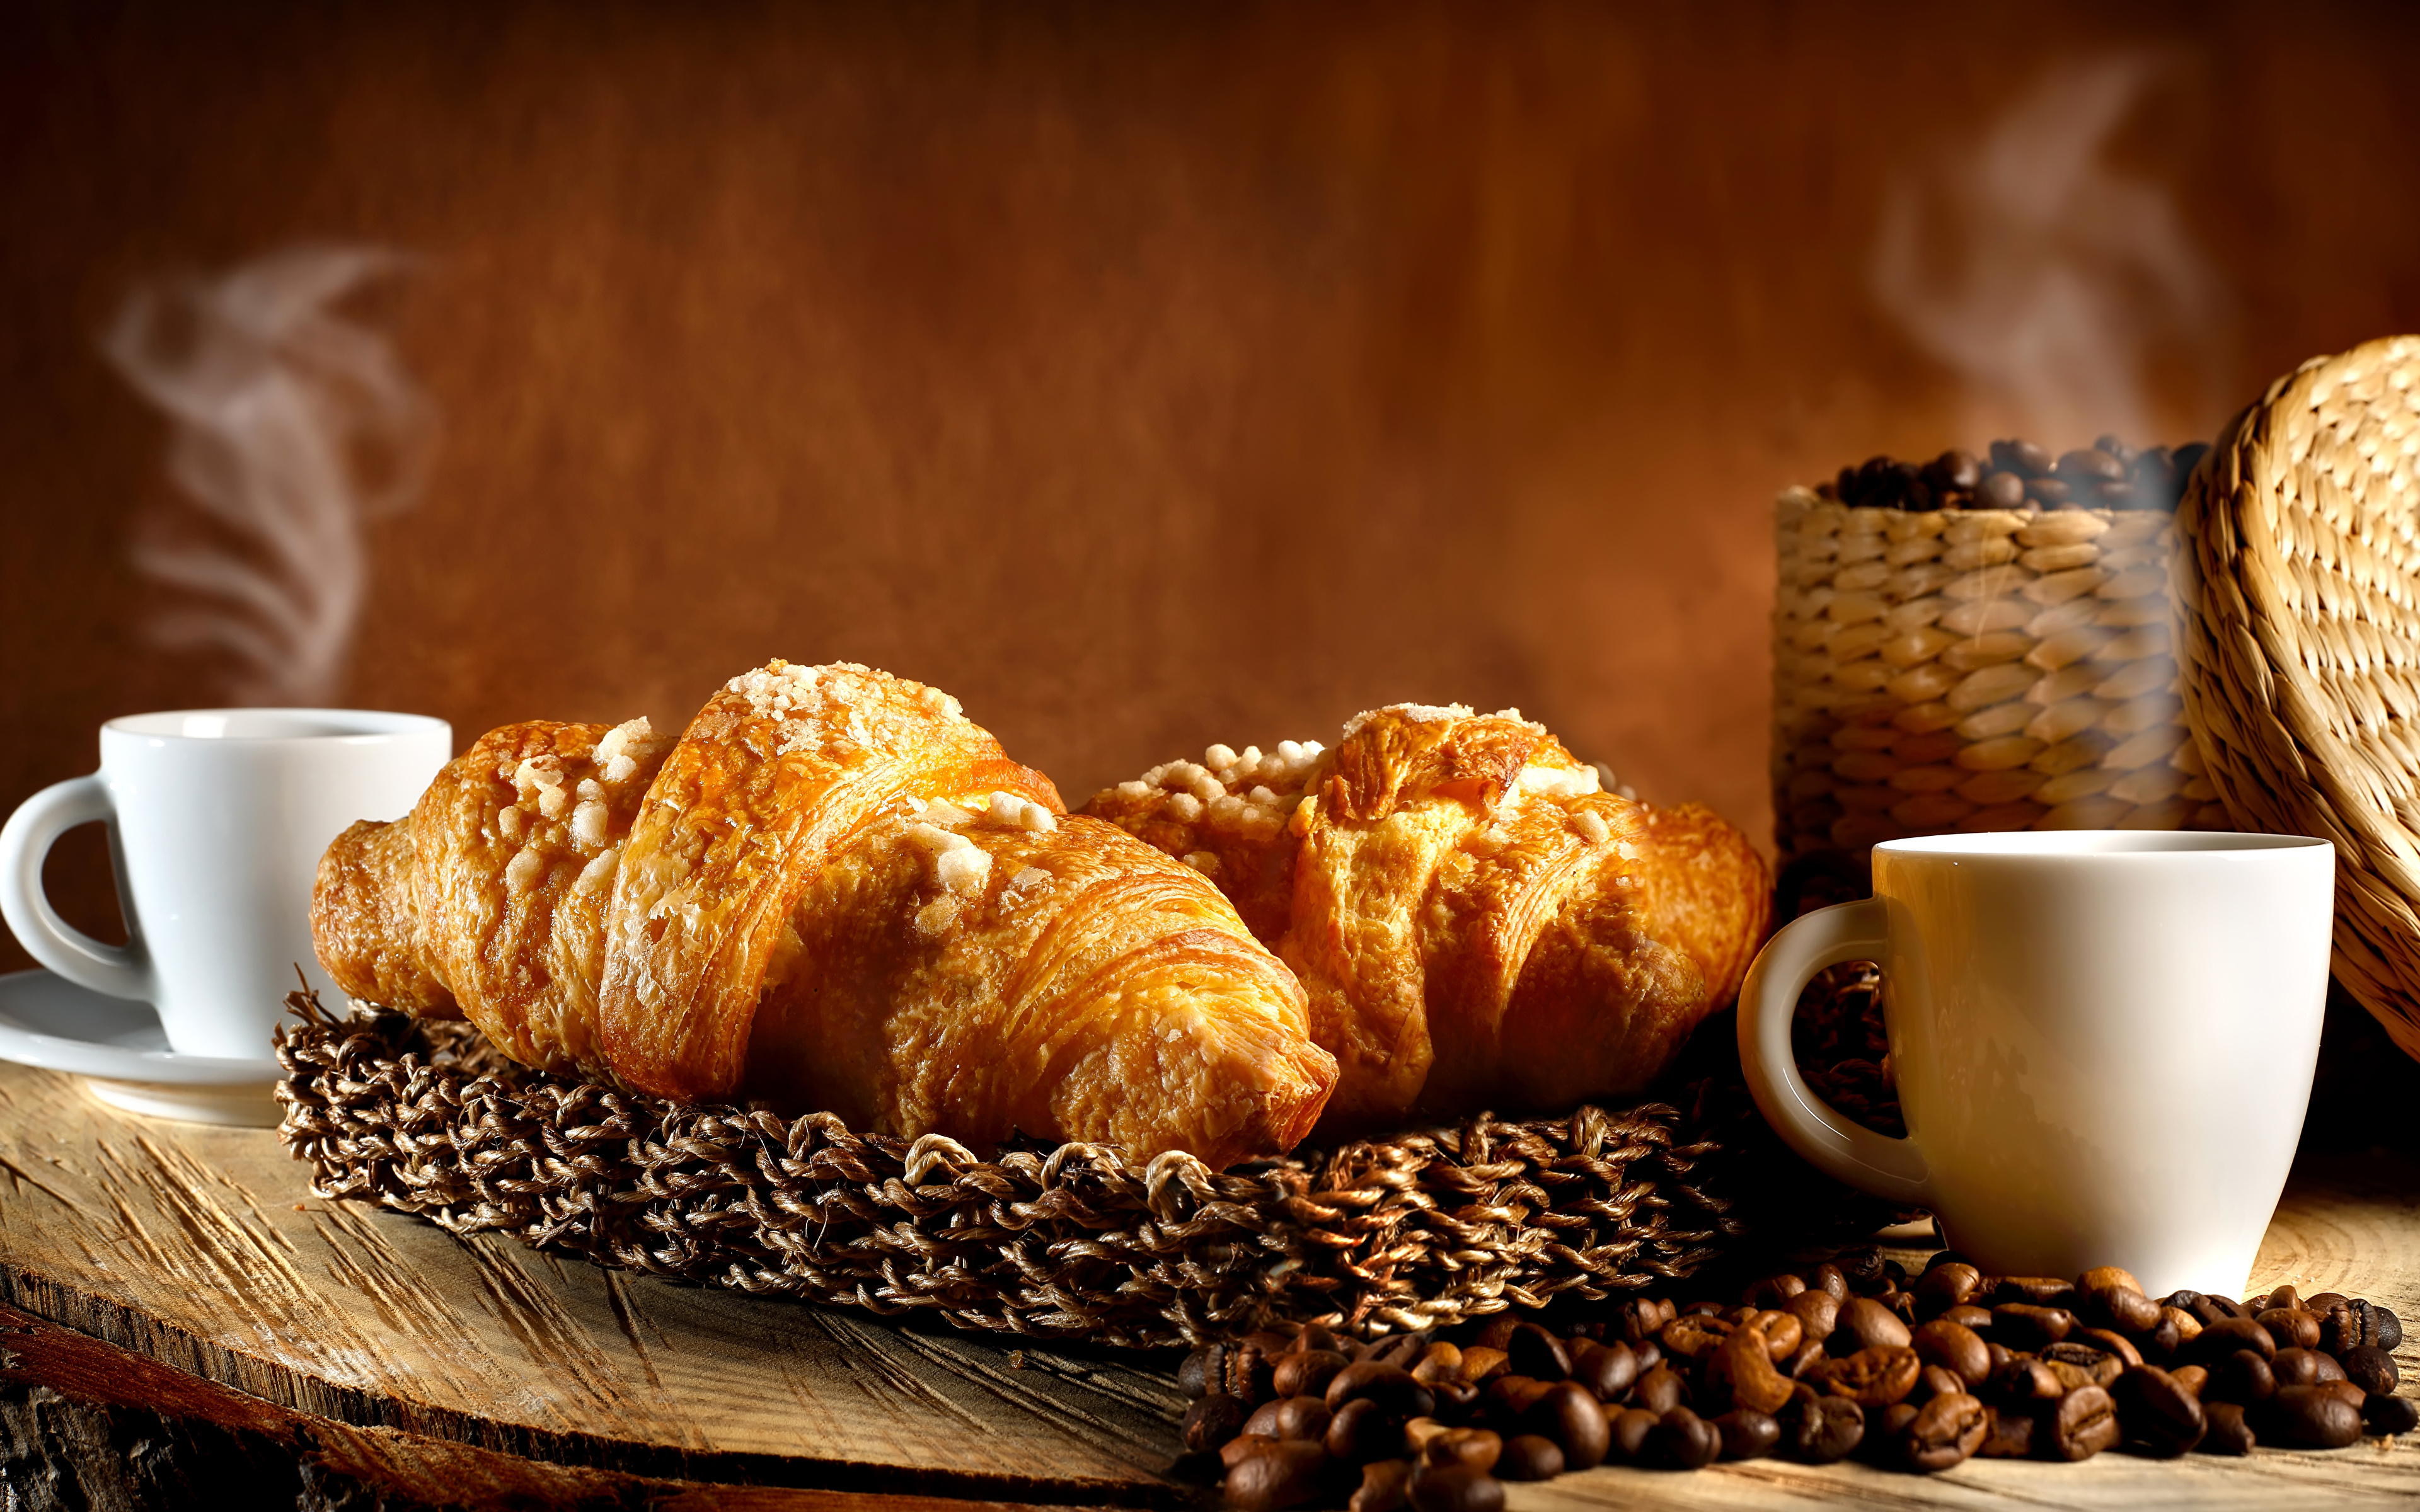 Croissant Wallpapers